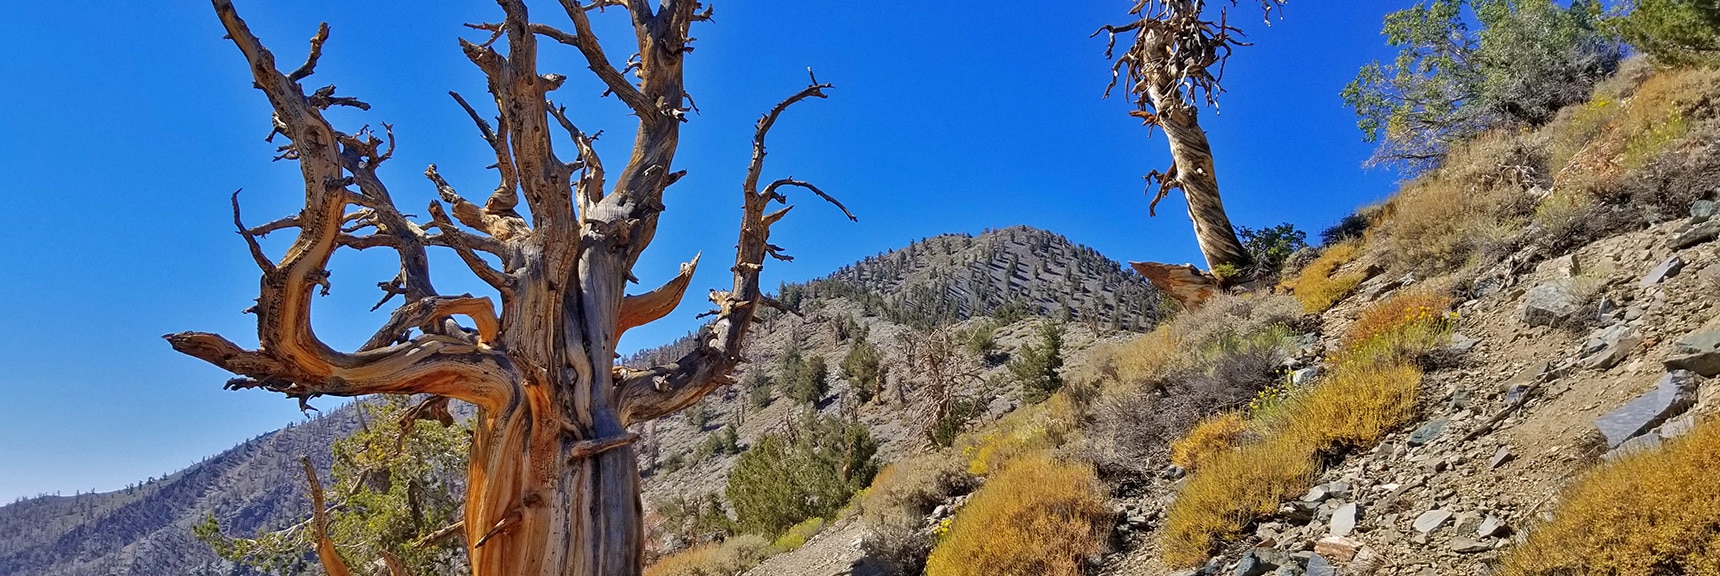 Bristlecone Pines Appear While Closing in on Telescope Peak Summit | Telescope Peak Summit from Wildrose Charcoal Kilns Parking Area, Panamint Mountains, Death Valley National Park, California